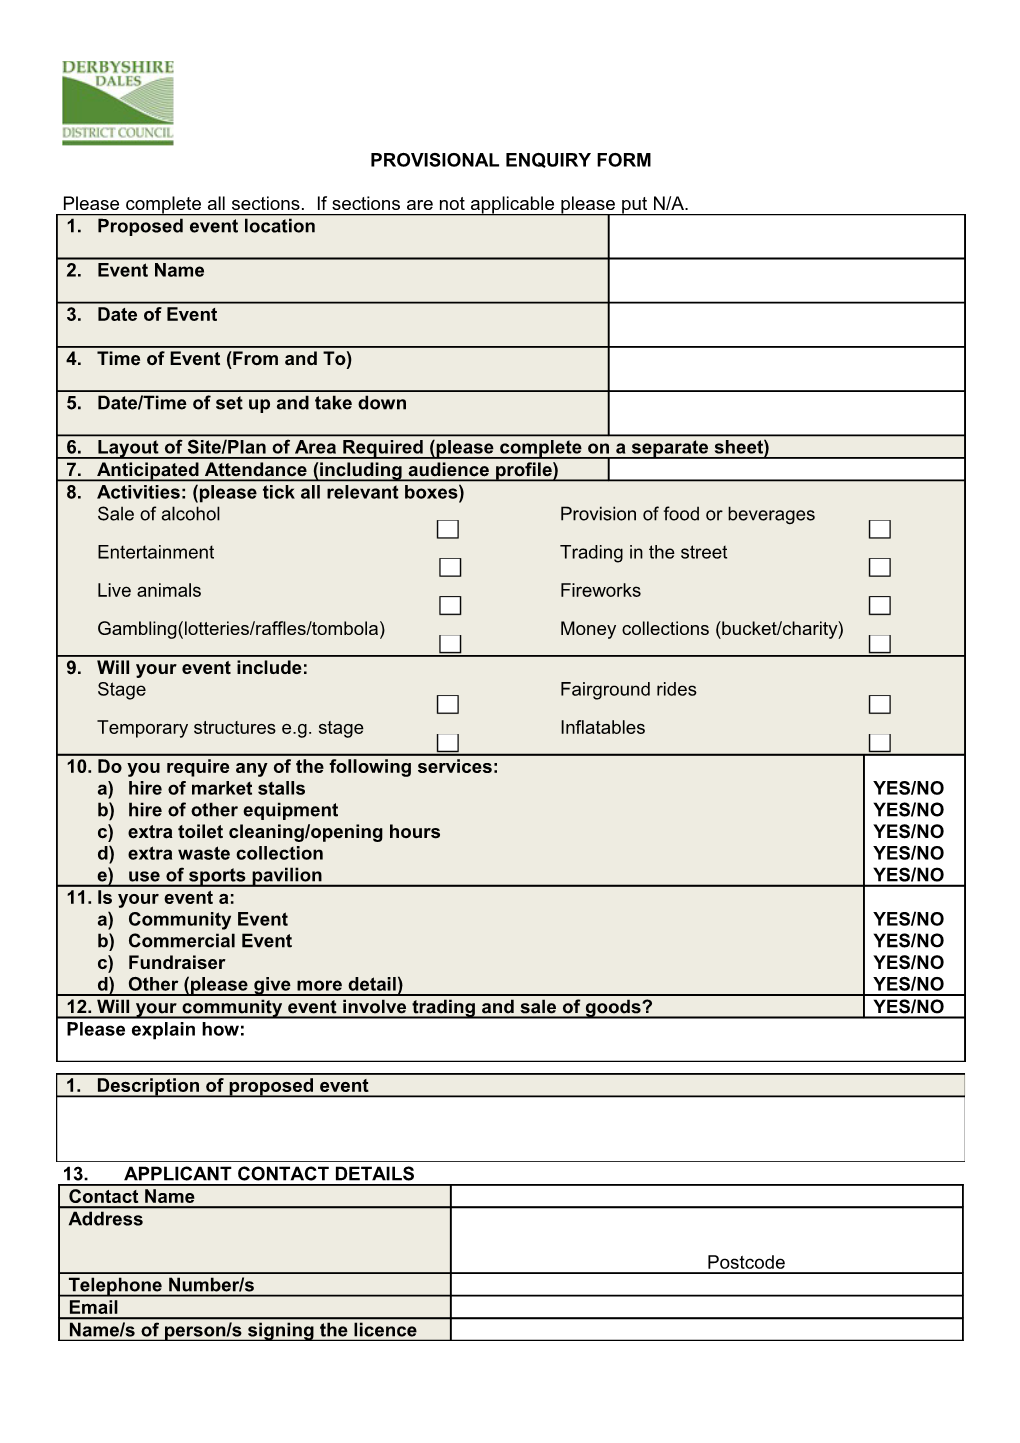 Provisional Enquiry Form